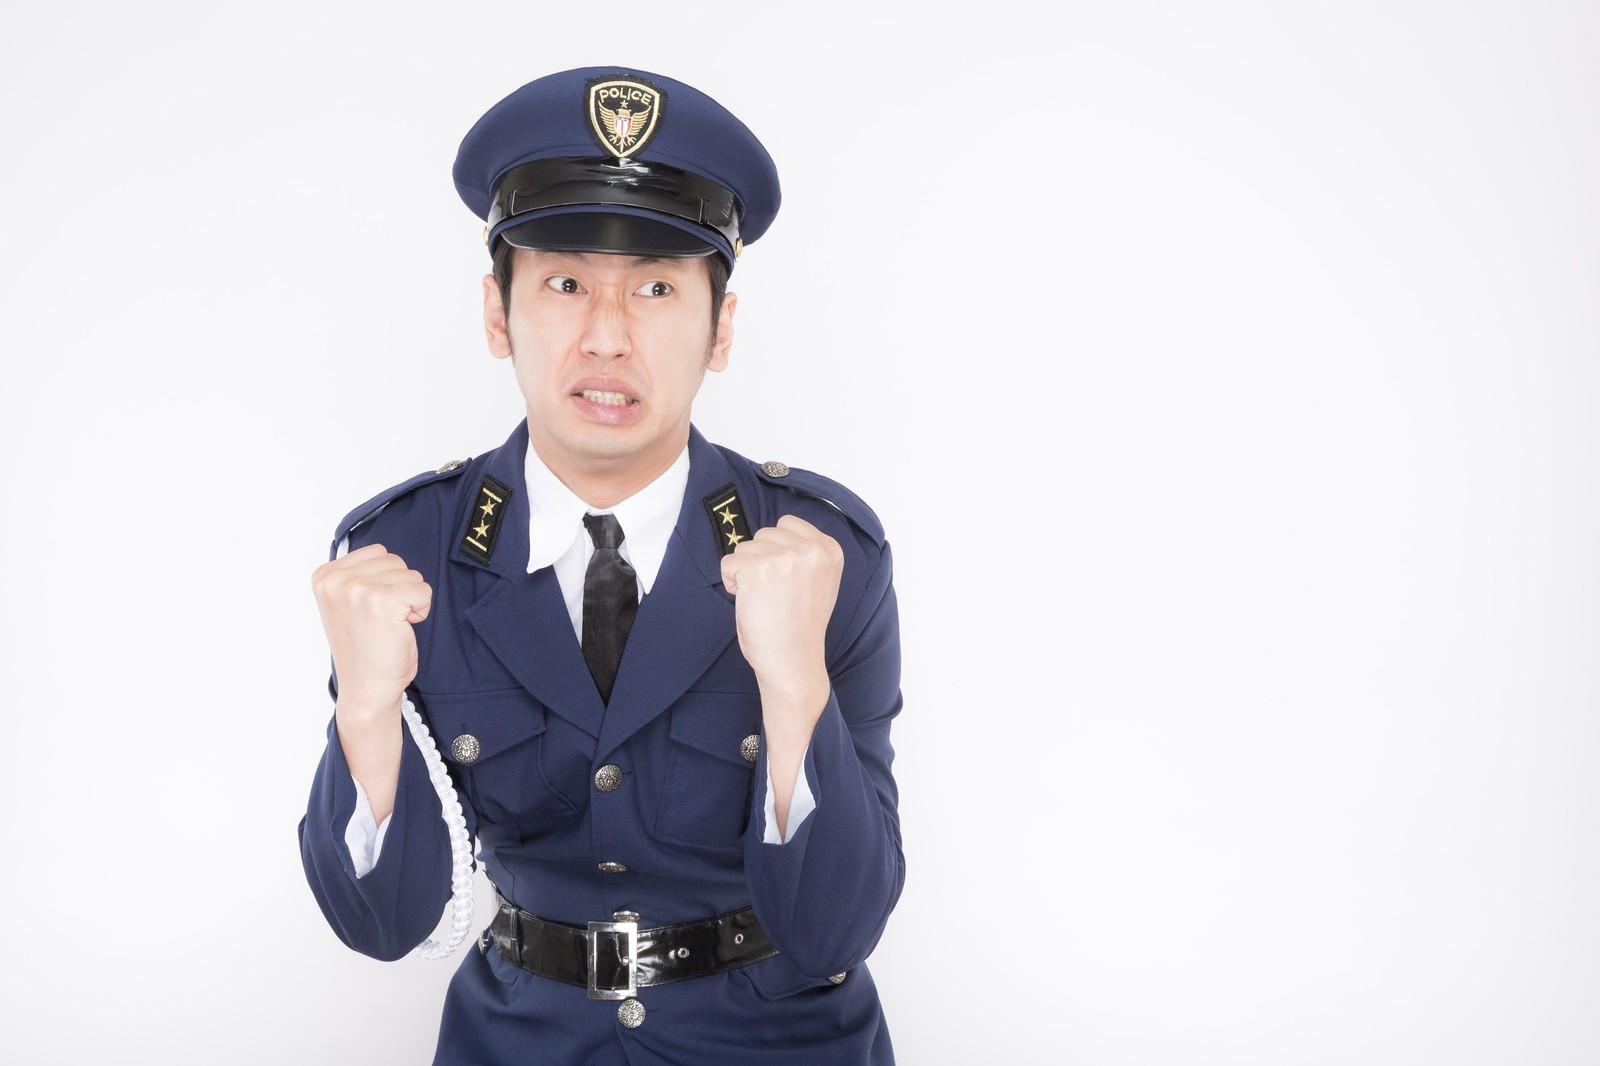 Japanese police officers turn police box into their own little love hotel,  do it instead of duty | SoraNews24 -Japan News-